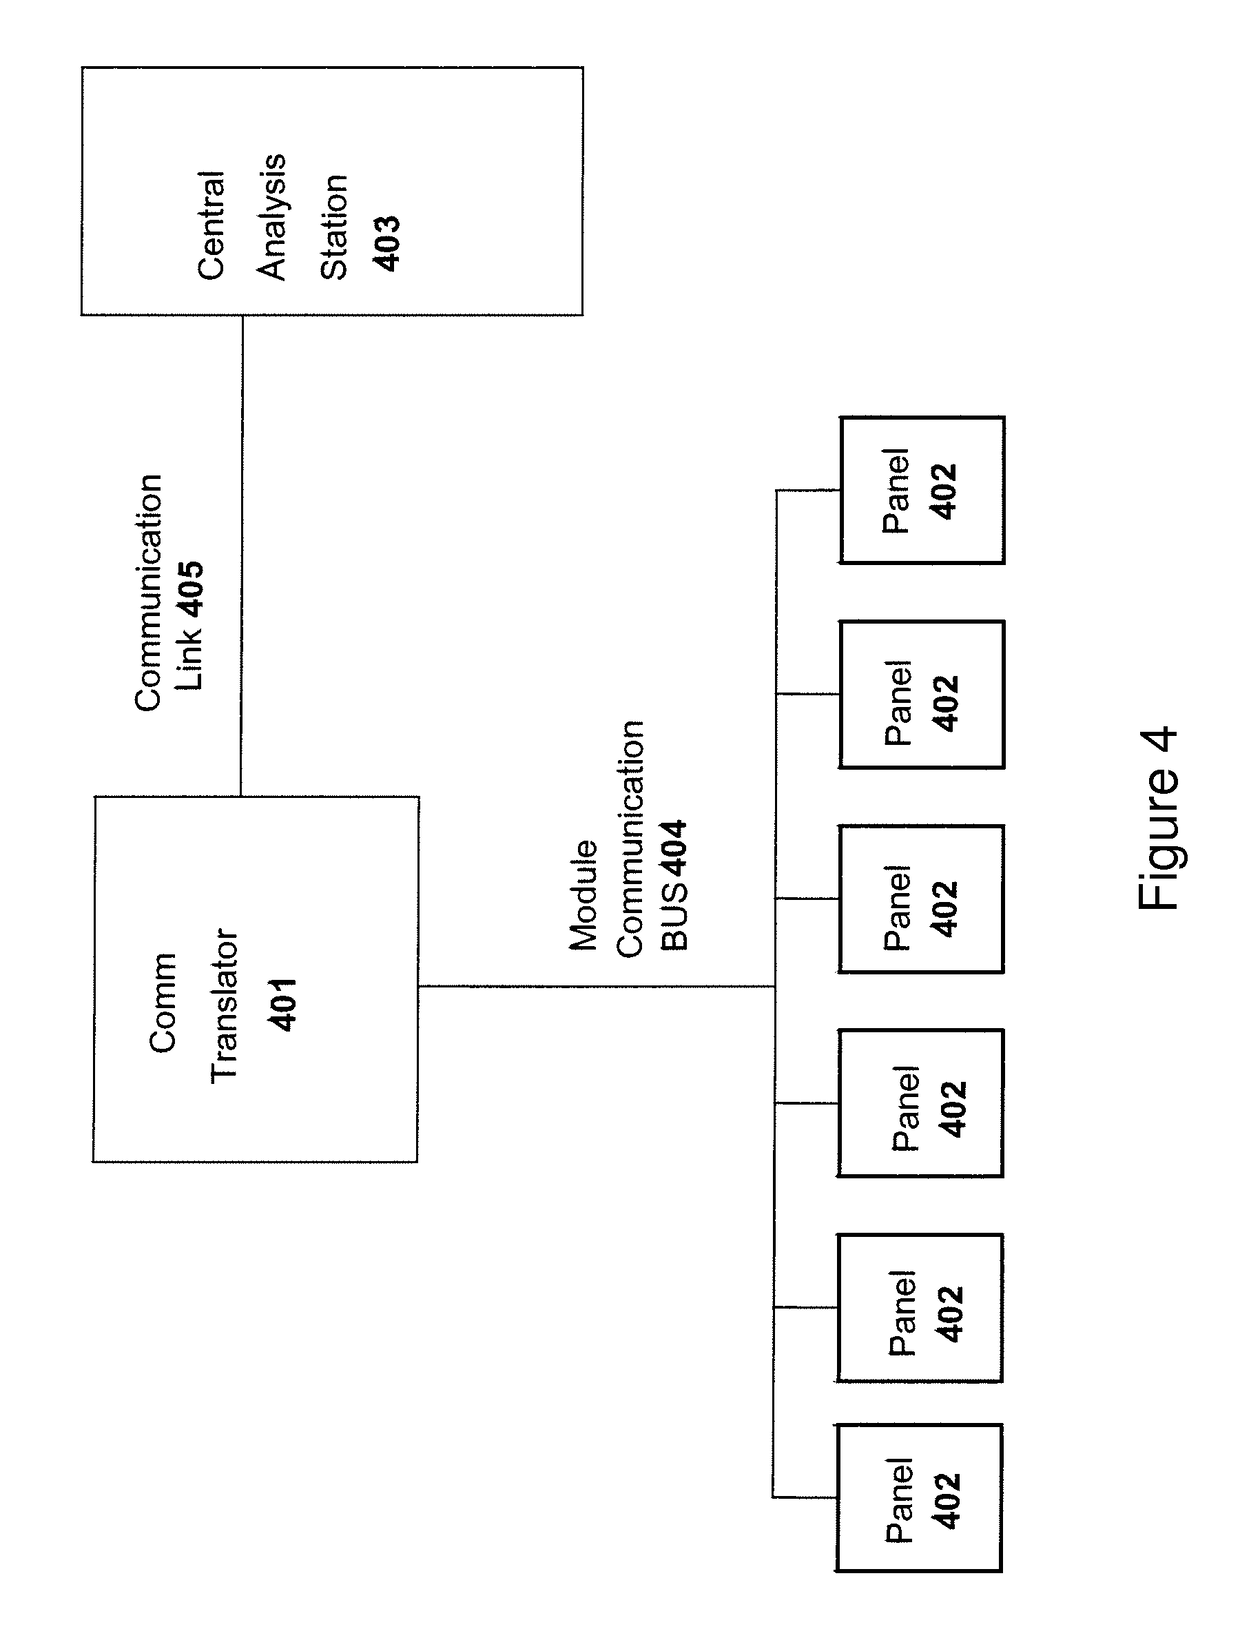 Monitoring of distributed power harvesting systems using DC power sources